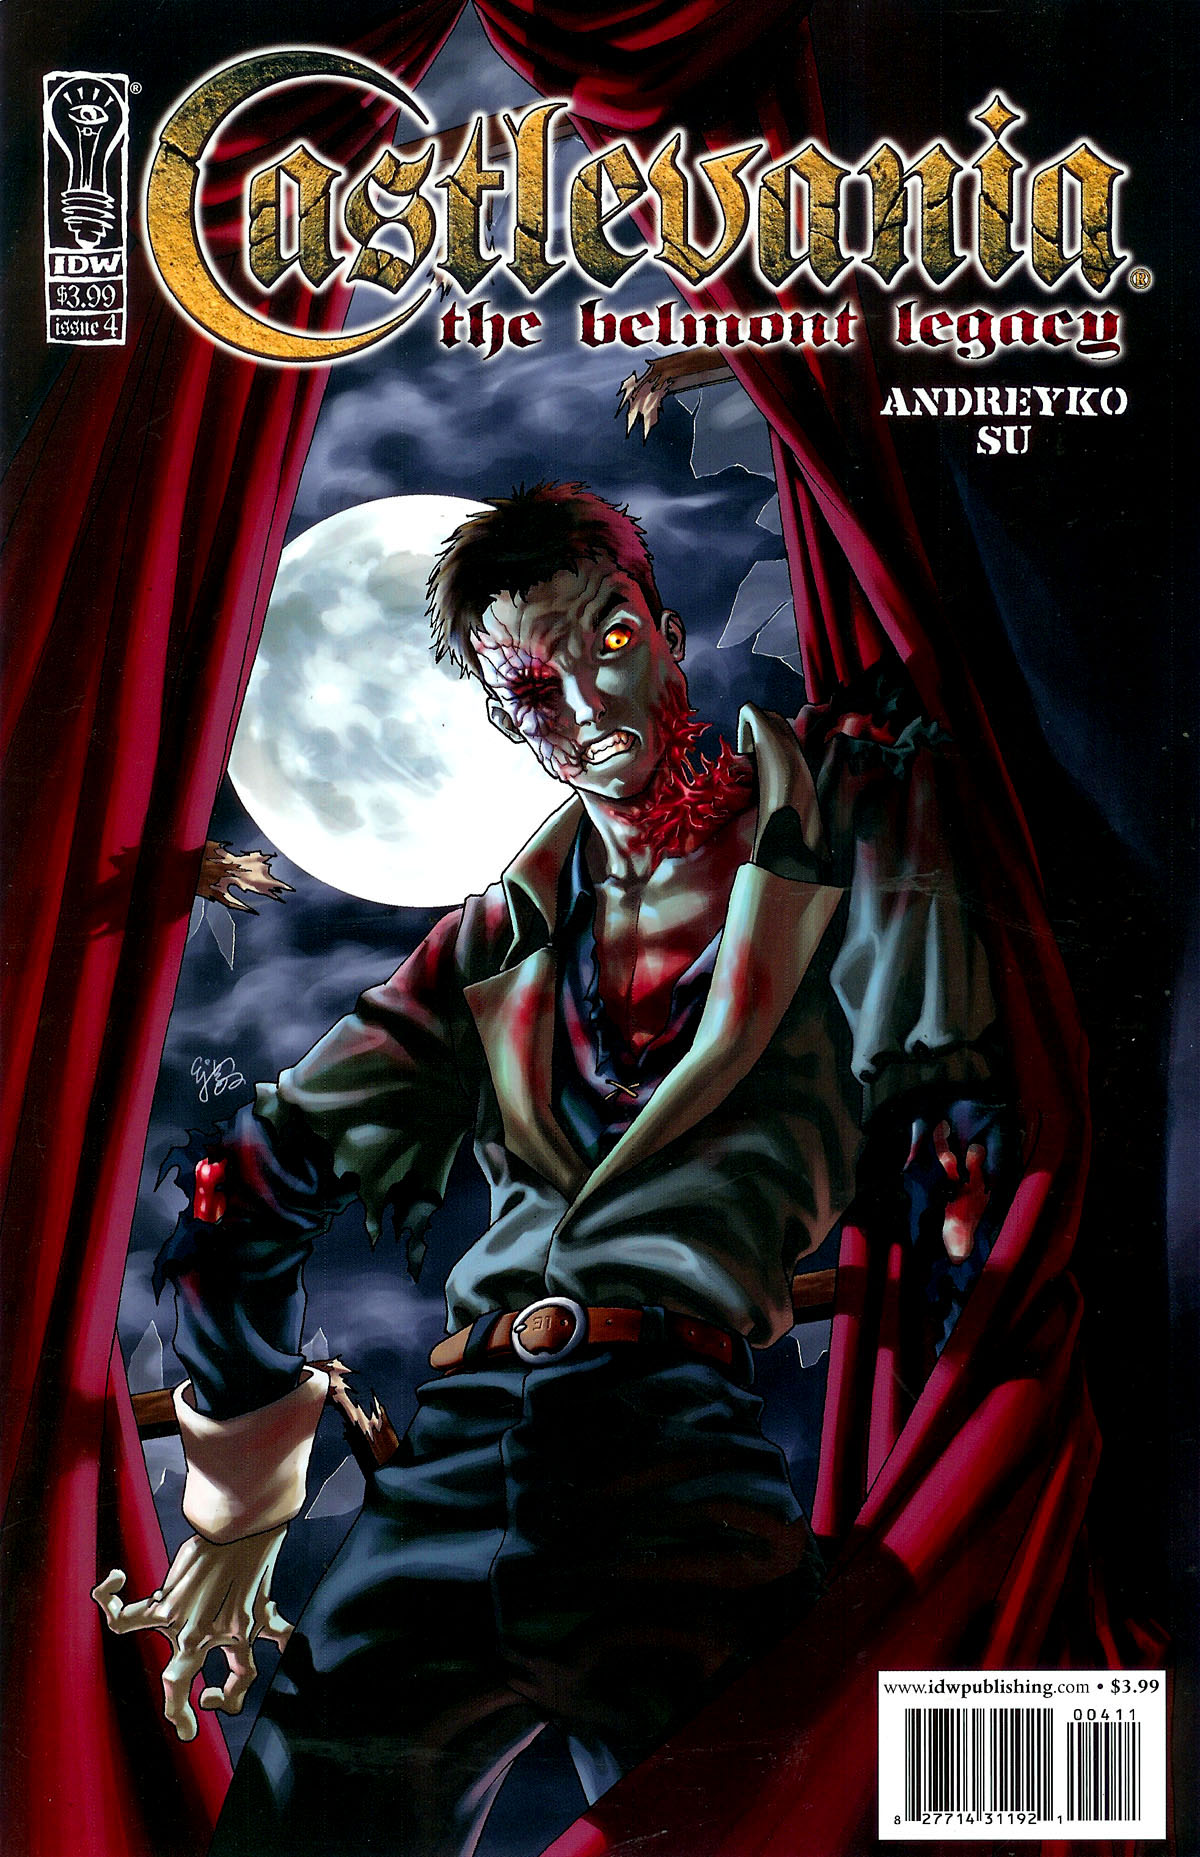 Read online Castlevania: The Belmont Legacy comic -  Issue #4 - 1